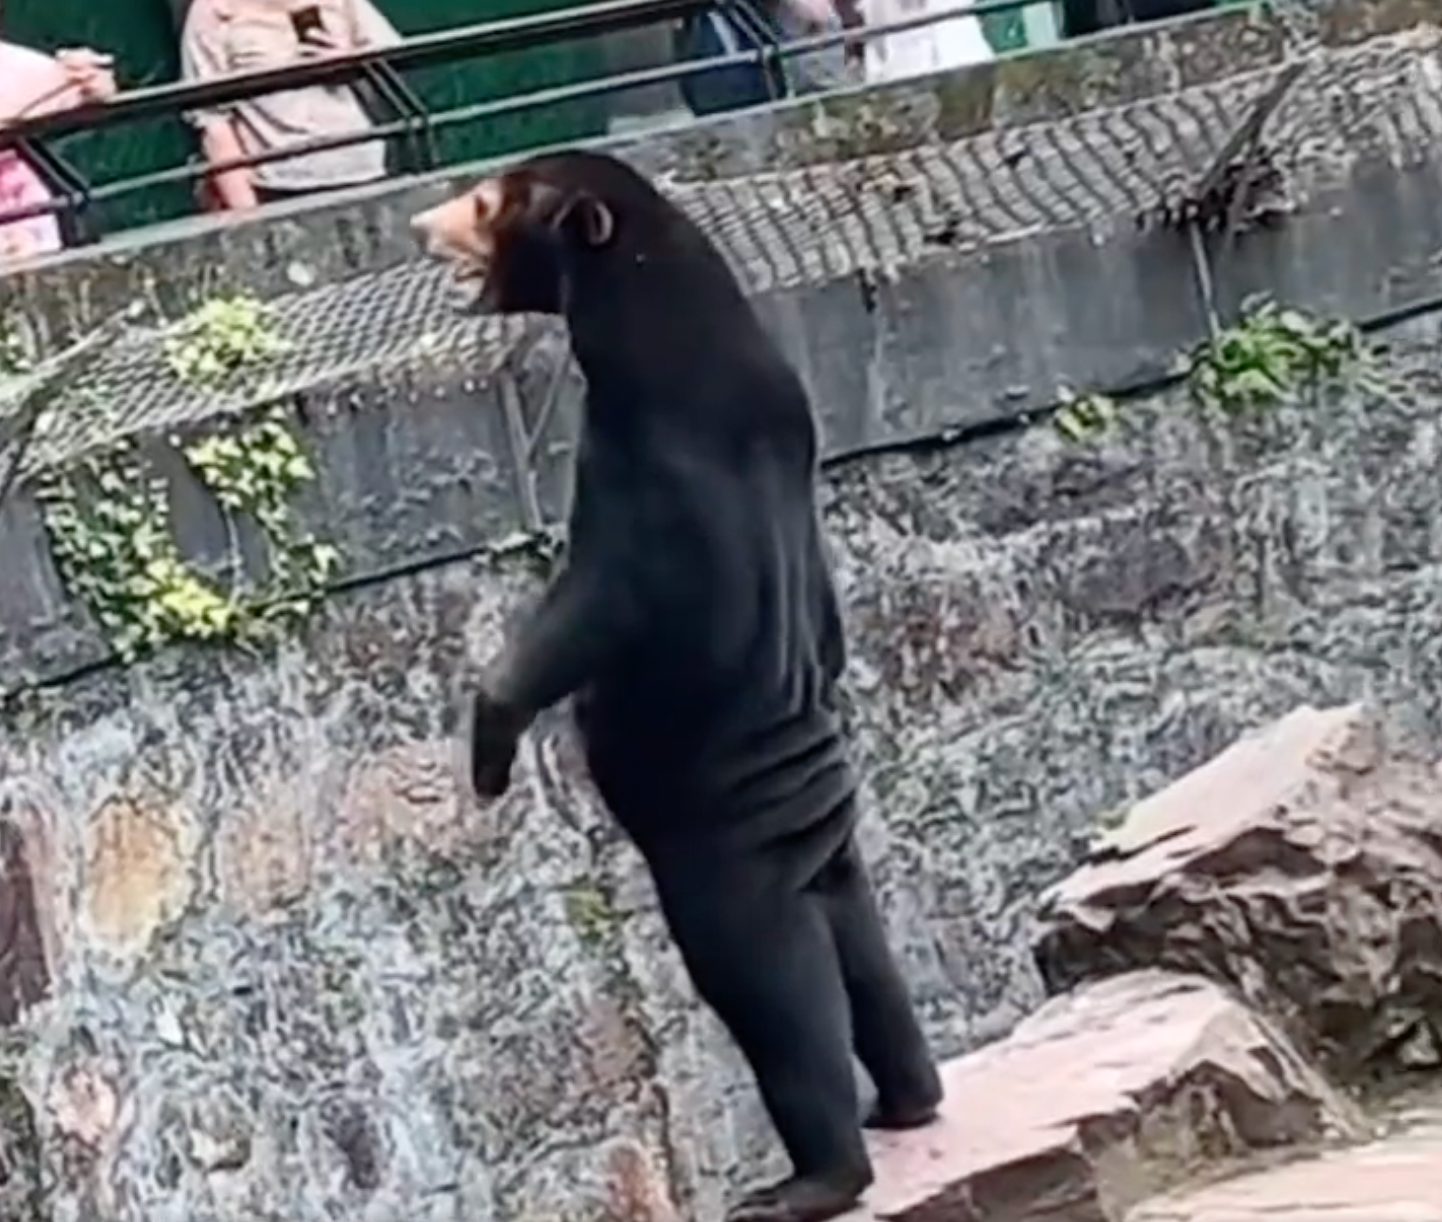 Onlookers were perplexed at the bear on its hind legs